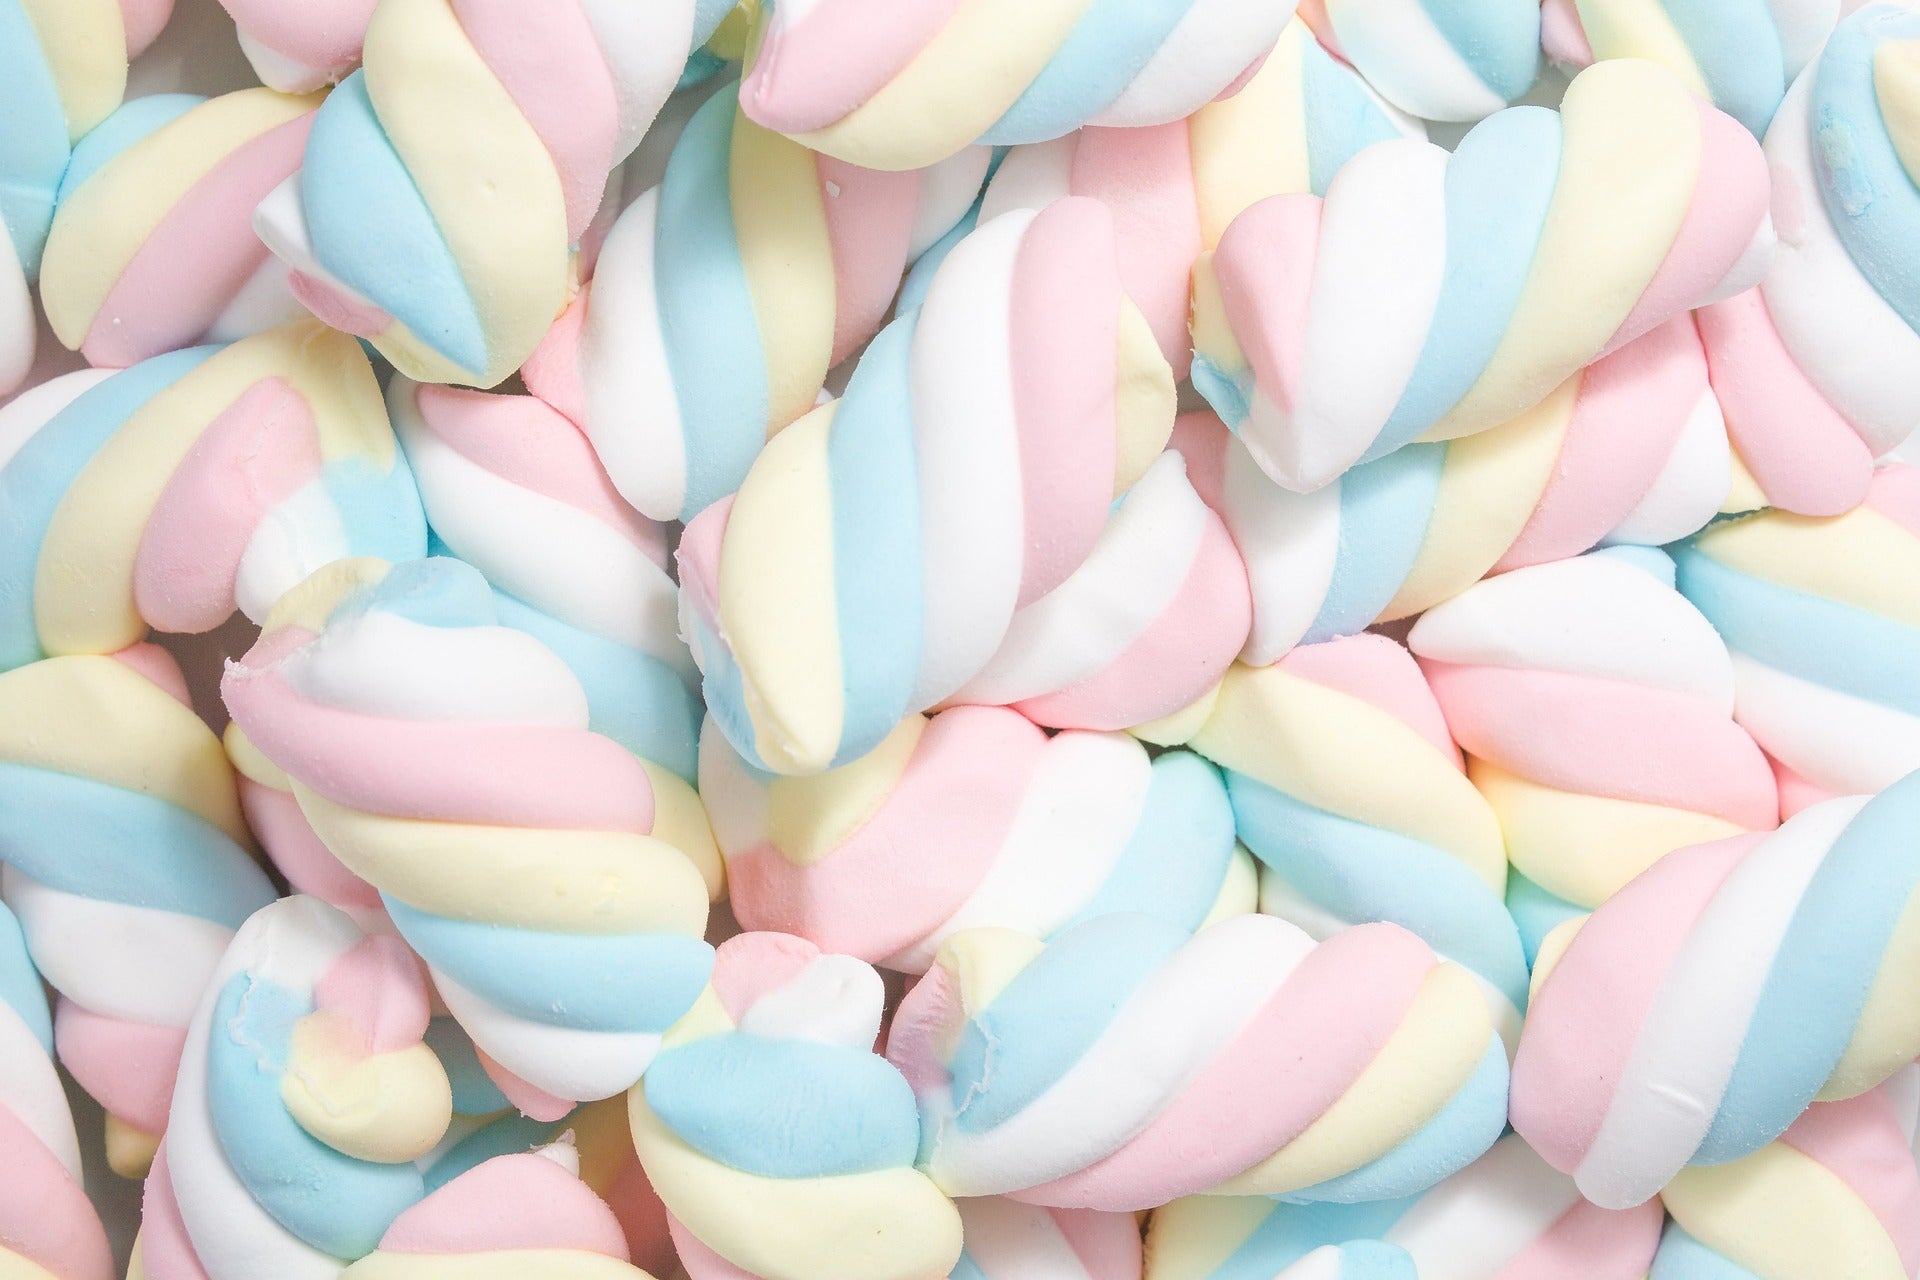 BOARDWALK MARSHMALLOW -Sweet vanilla and marshmallows and warm, creamy sandalwood with a hint of white magnolia blossoms. ***Compare to BOARDWALK MARSHMALLOW CLOUDS***   Available in Perfume Oil, Body Spray, Fragrance Oil, Solid Perfume, Soap, Lotion, Wax Melts, Cologne, Beard Balm and More. 